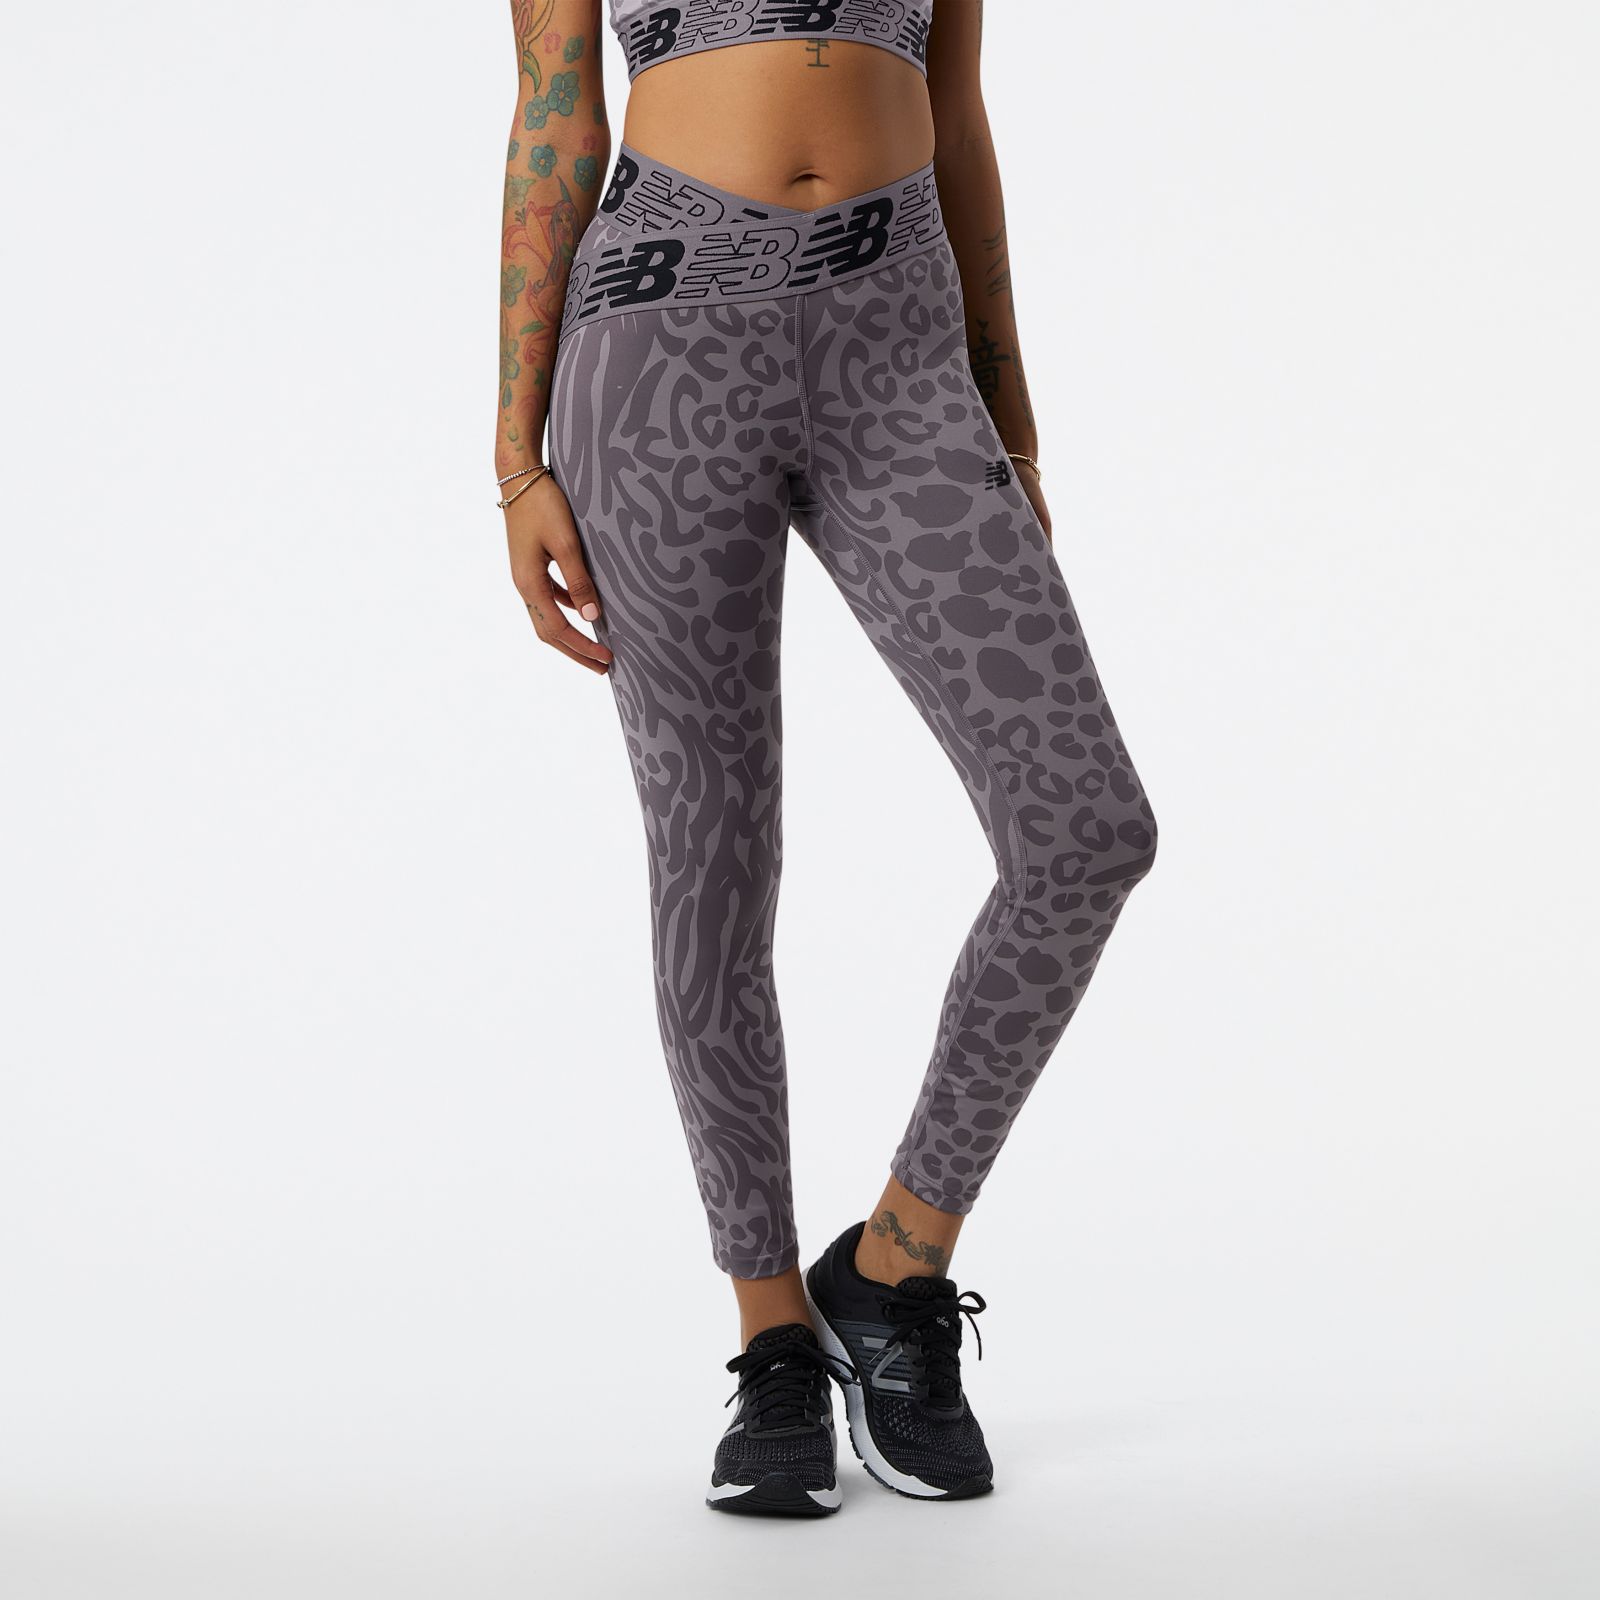 Made To Order Printed Leggings - WOMEN from Fashion Crossover London UK